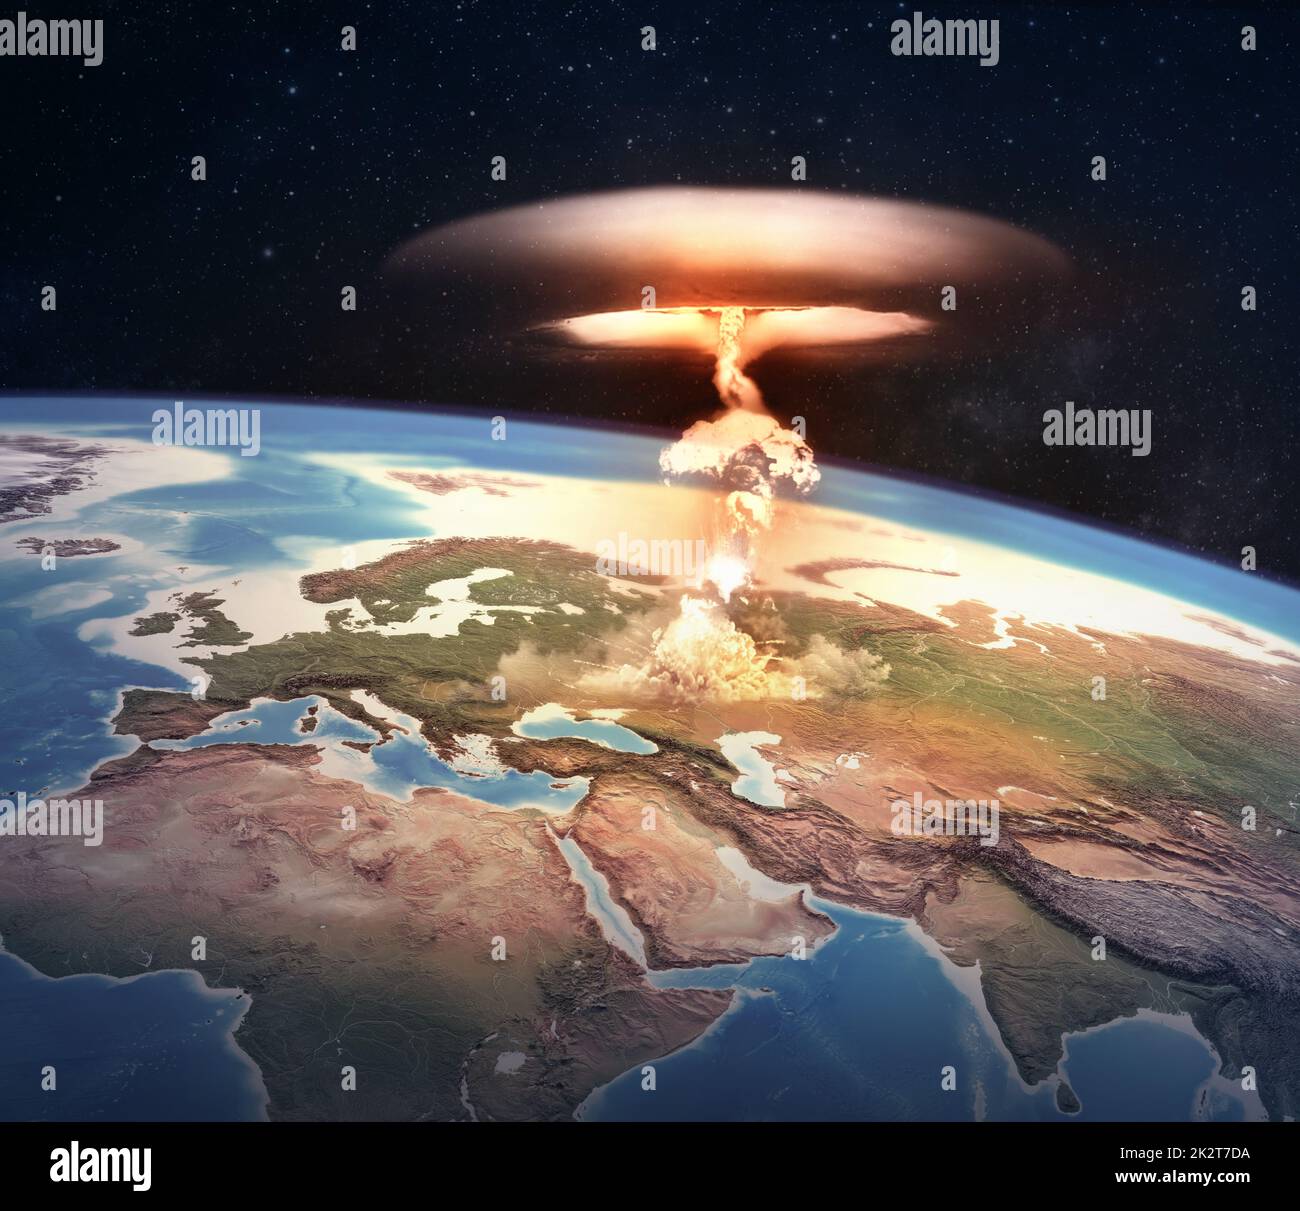 Atomic bomb explosion on Europe. Nuclear war starting with a mushroom cloud, dangers of nuclear energy for planet Earth - elements furnished by NASA Stock Photo